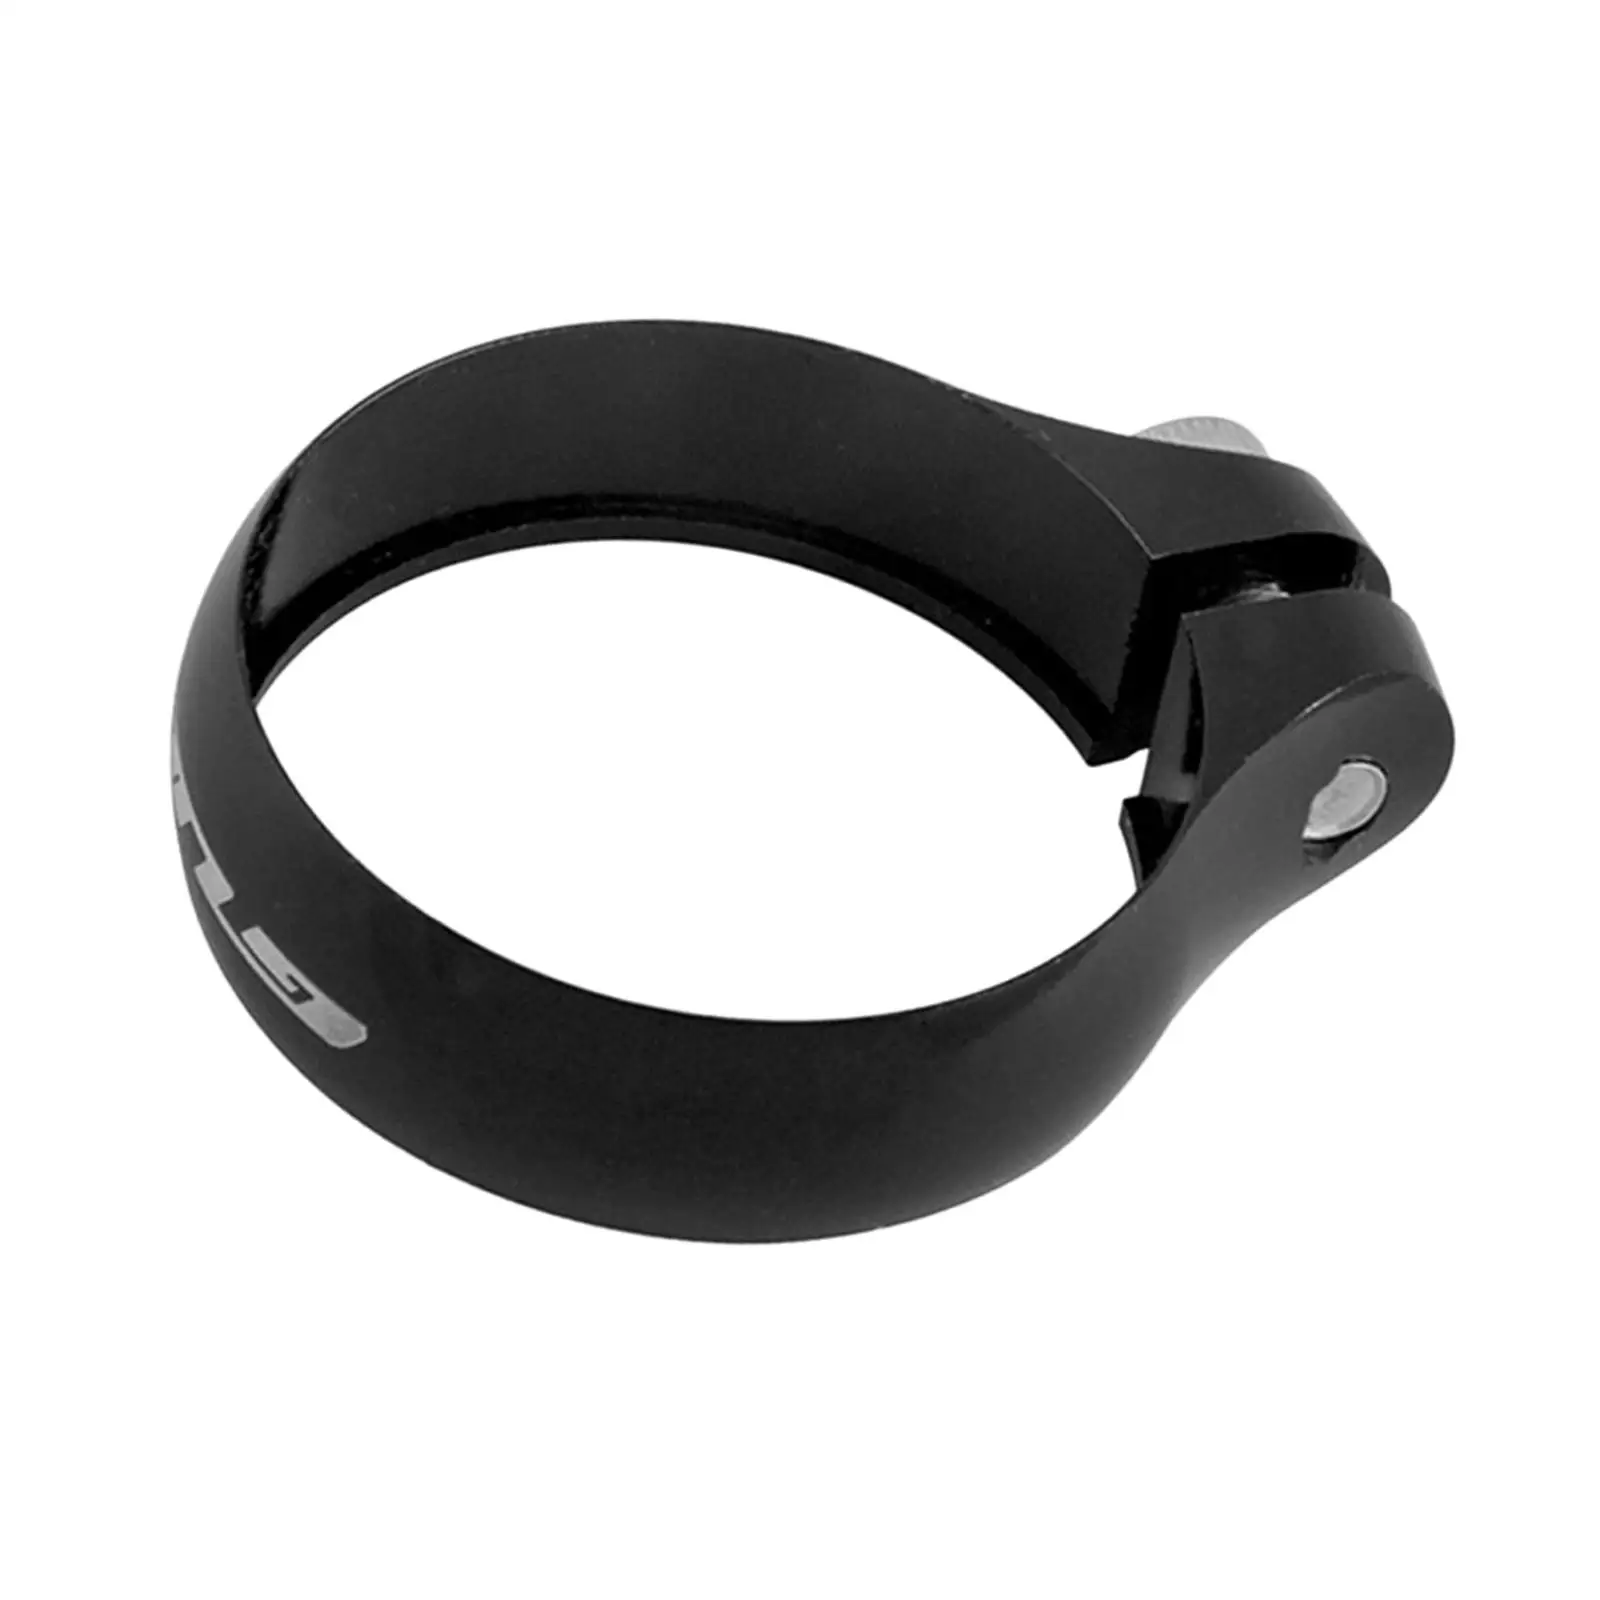 Bike Seat Post Clamp Aluminum Alloy Lock   Seat Adapter for Cycling